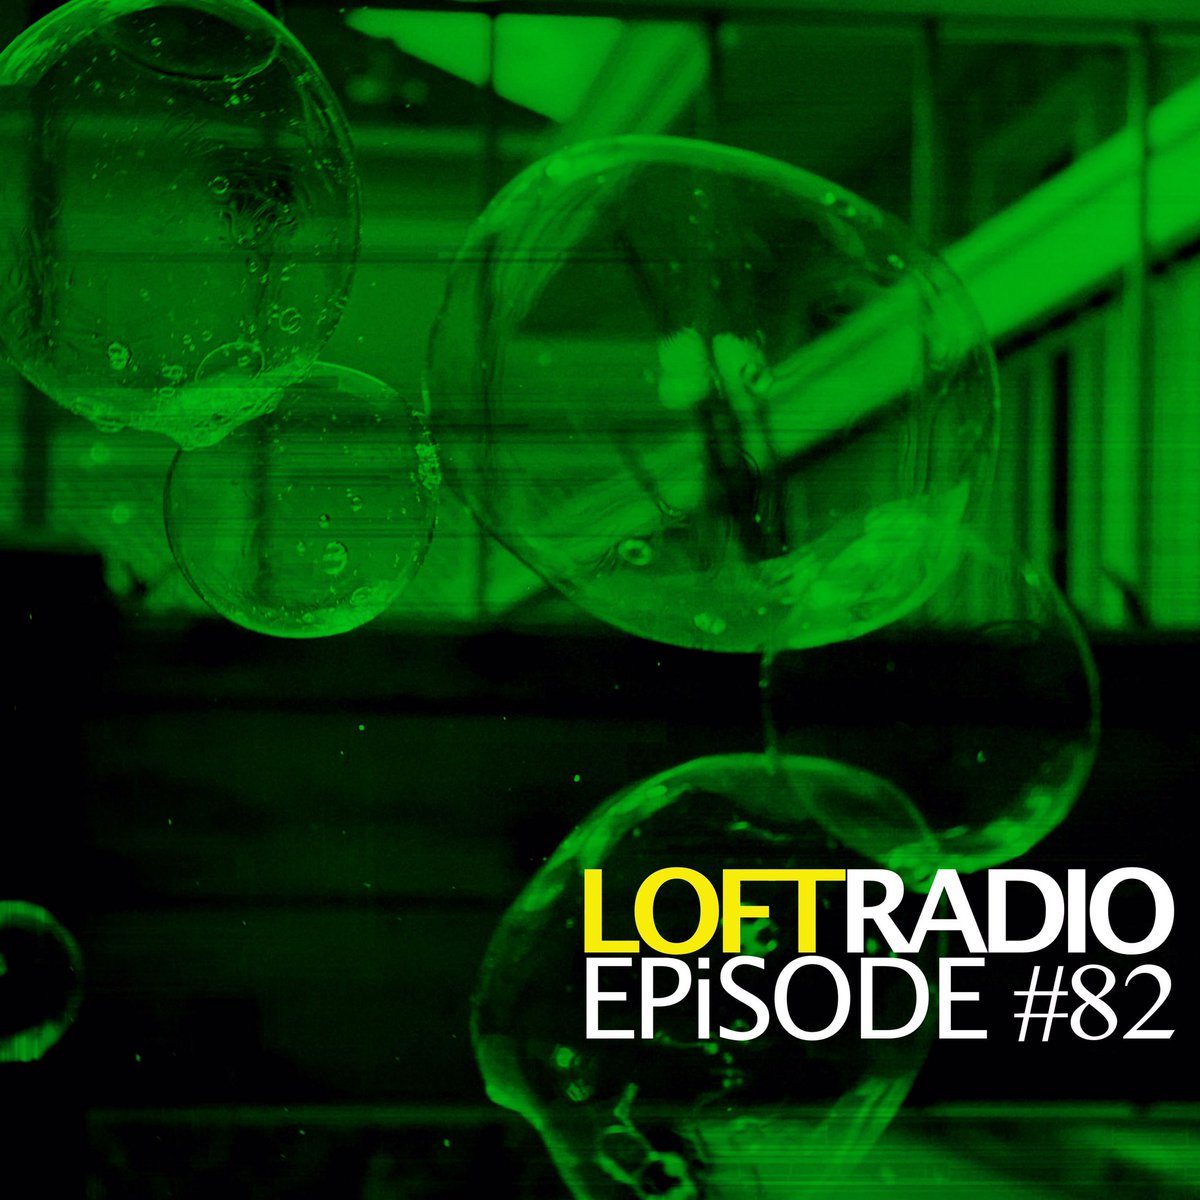 Loft Radio #82

This time we dive into (mostly) new music released in April/May from all over the world. 

Man in a Loft

- maninaloft.com
- mixcloud.com/TruthSeekersRa…
- pharcydetv.com

Catch us on Pharcydetv.com every Friday night at 9PM + Sunday 1pm